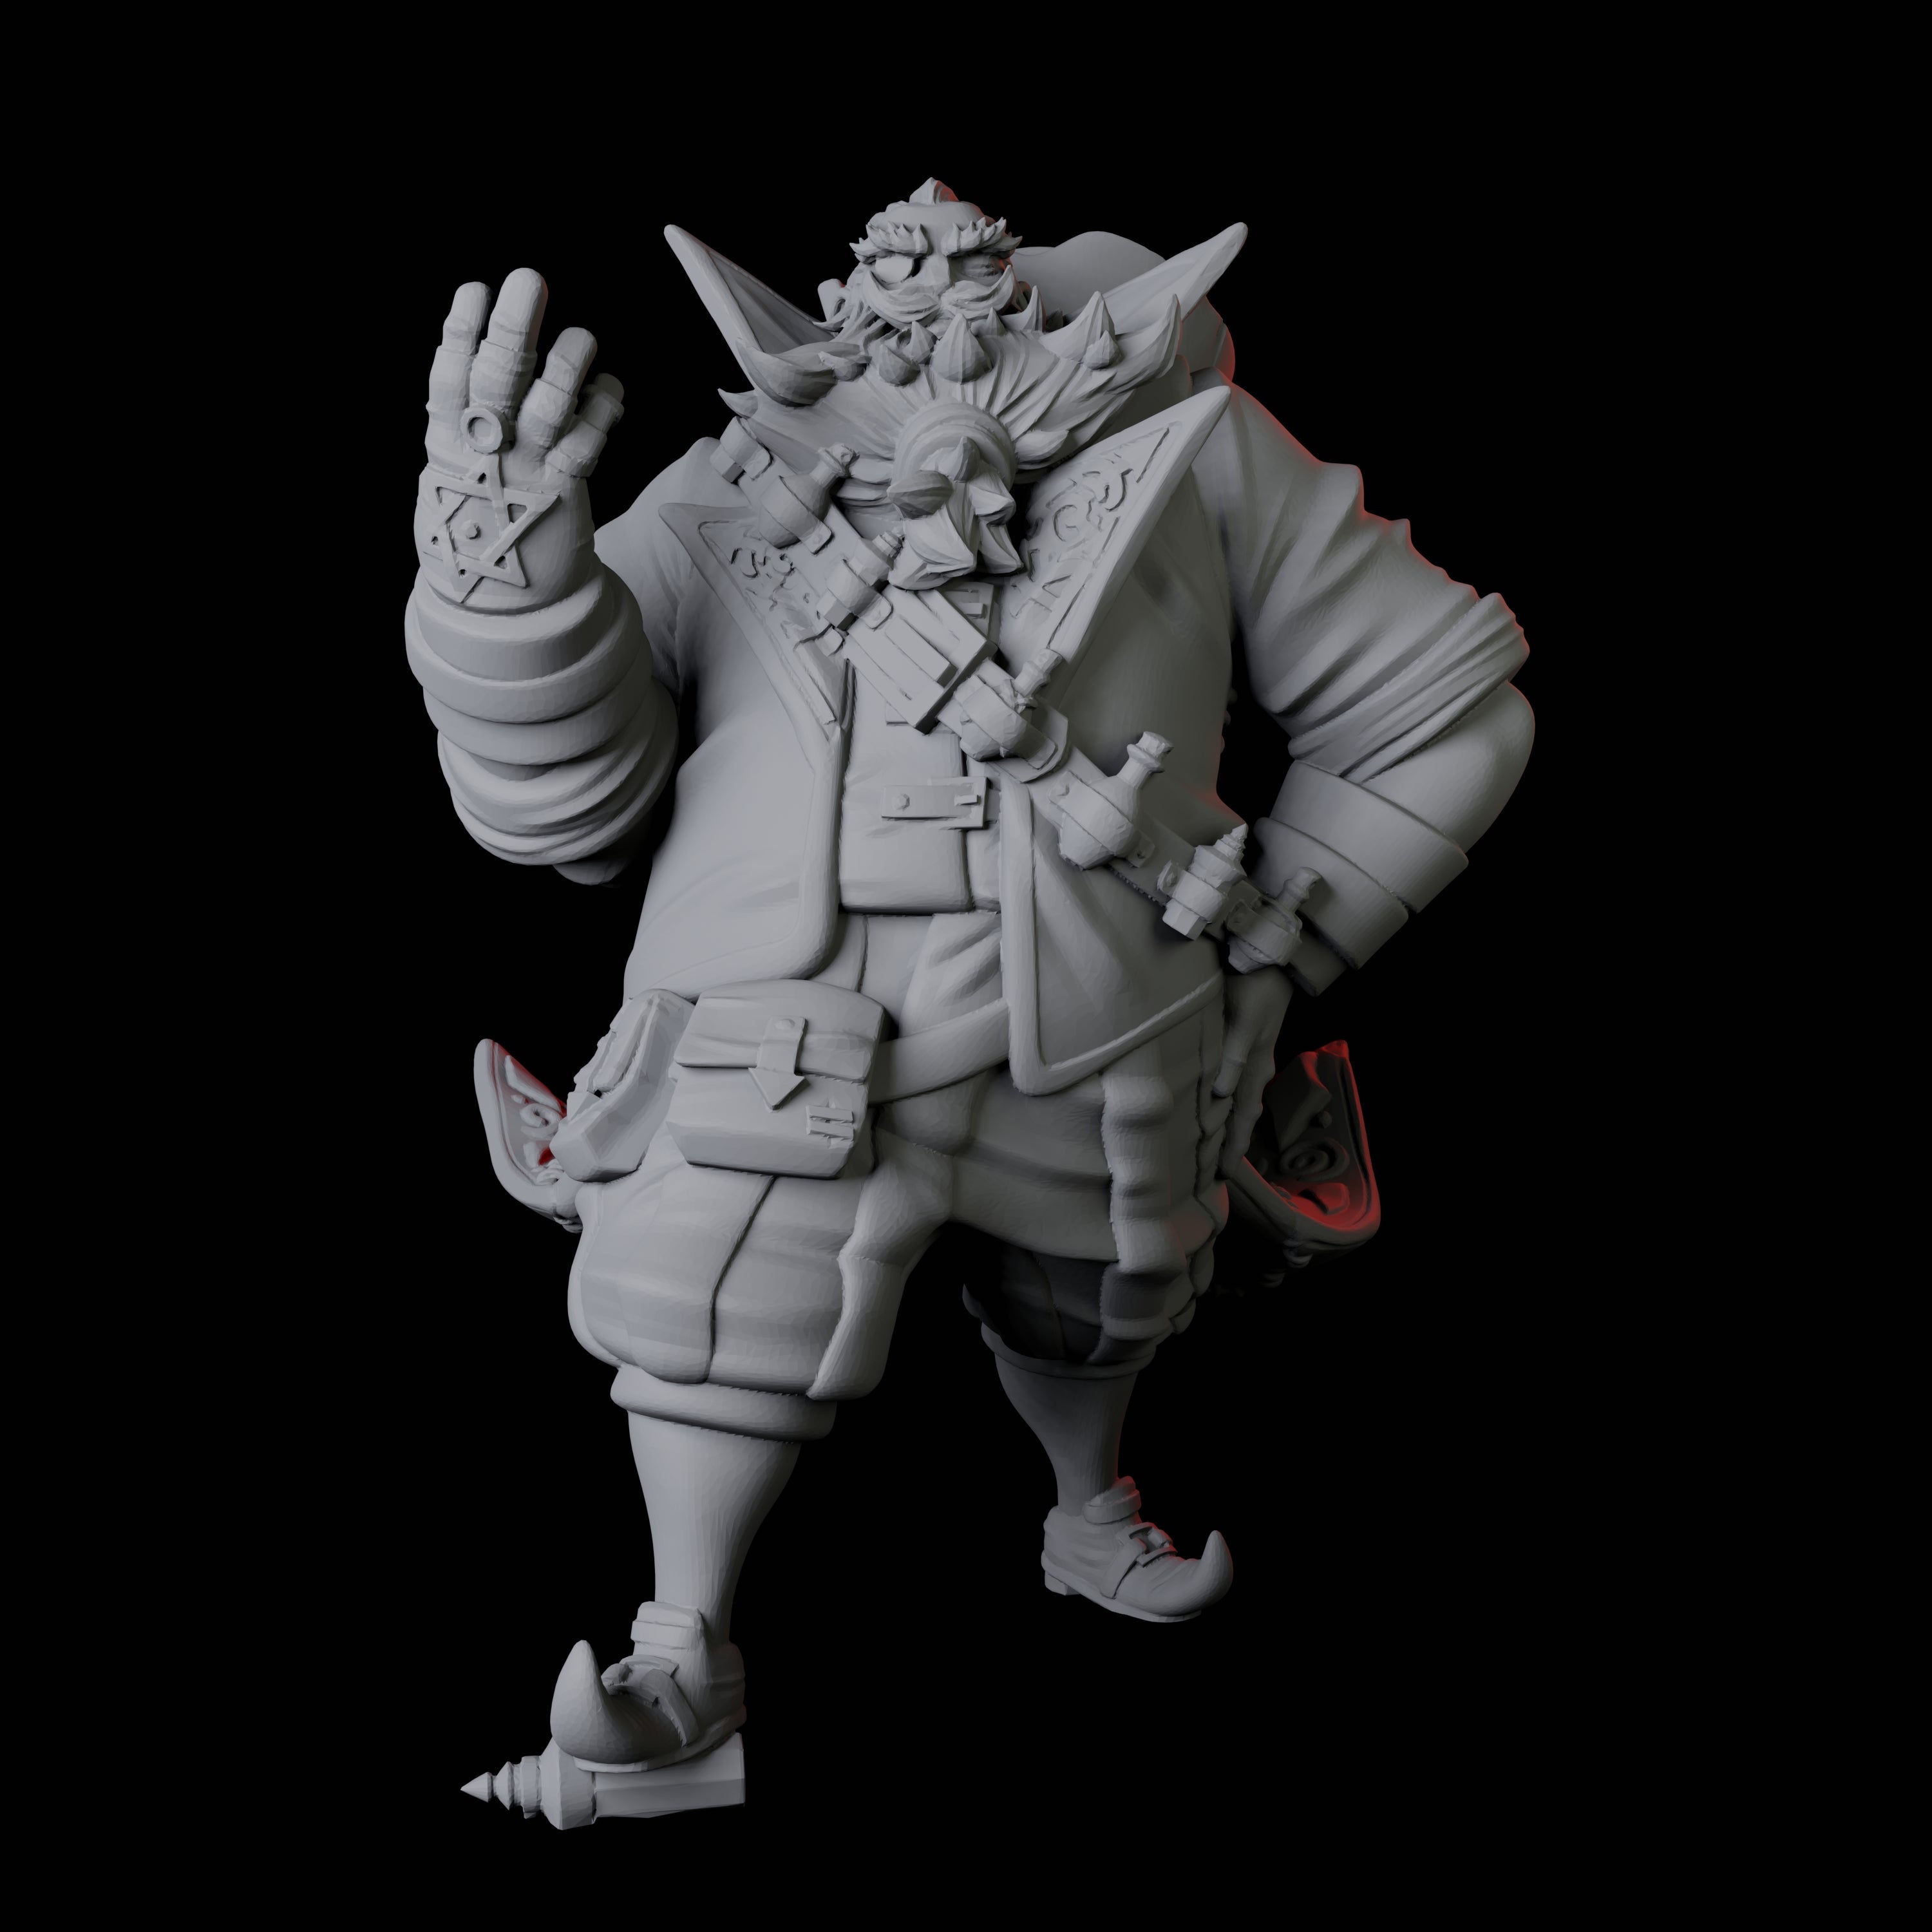 Portly Alchemist A Miniature for Dungeons and Dragons, Pathfinder or other TTRPGs